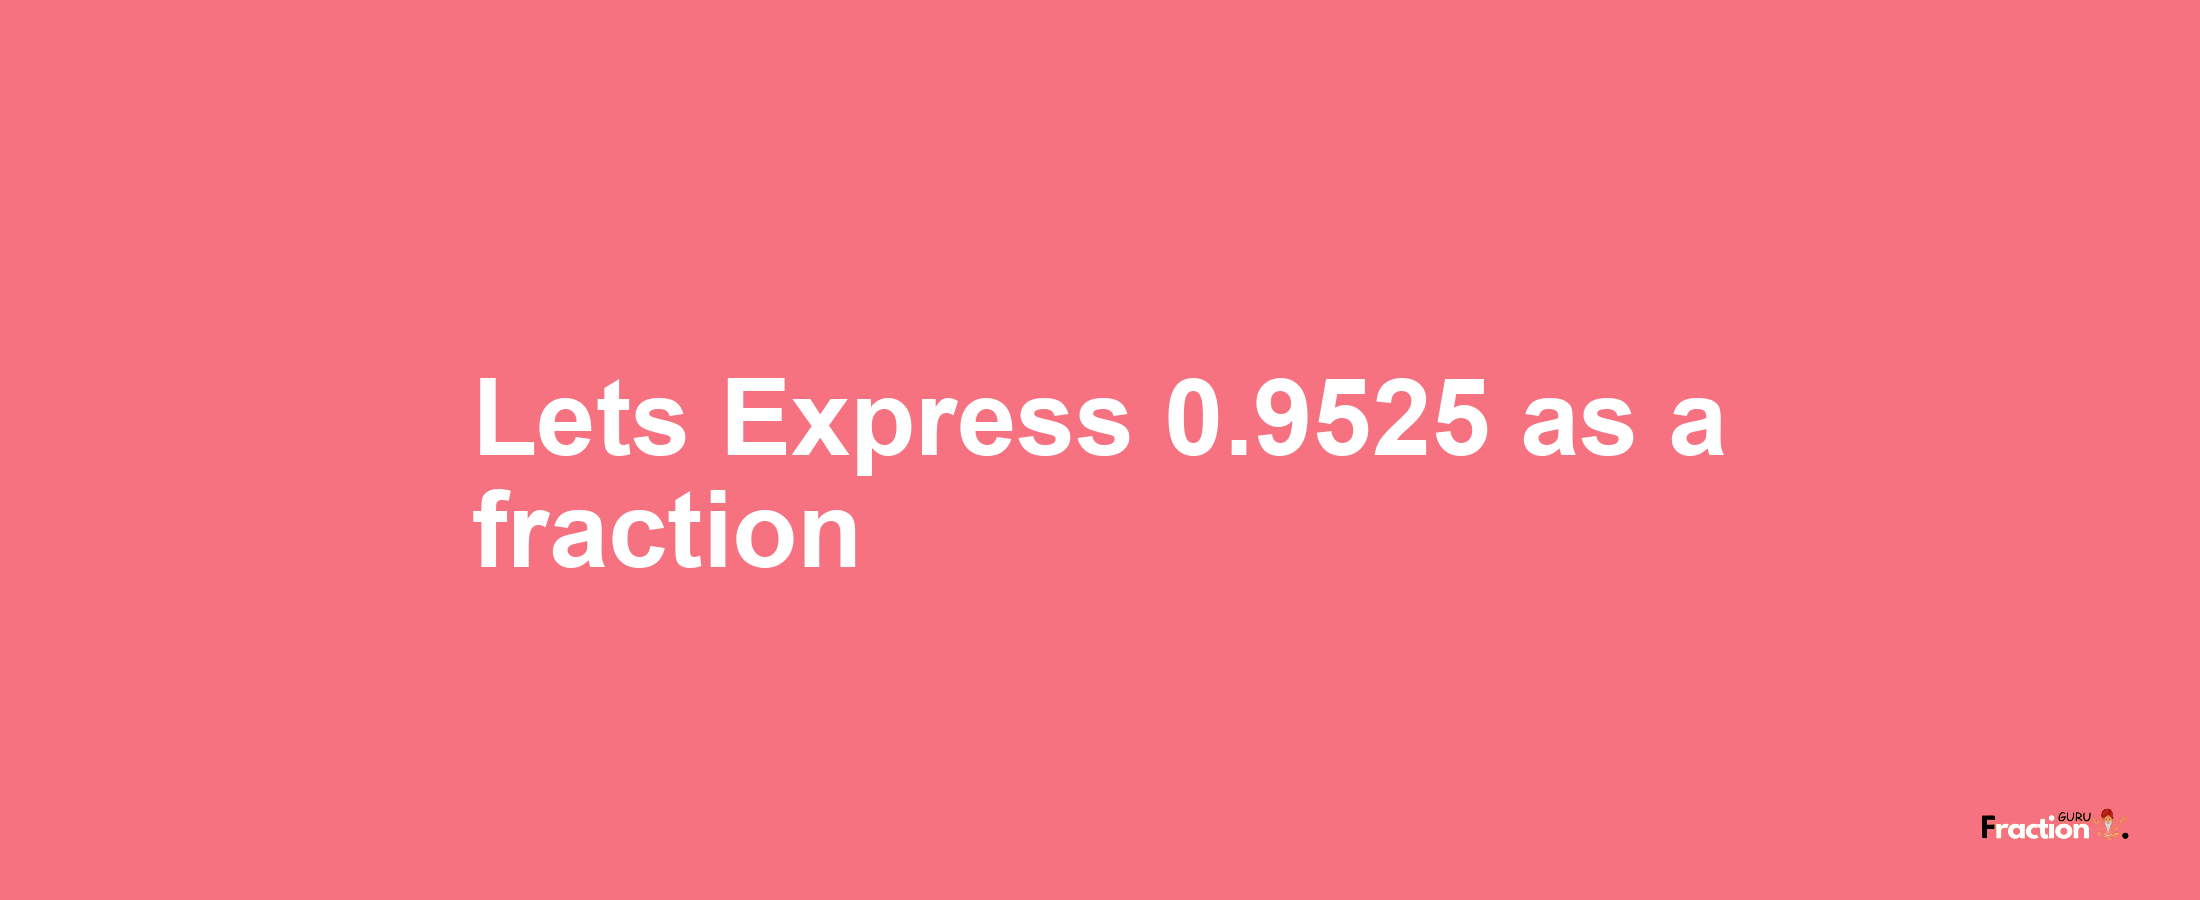 Lets Express 0.9525 as afraction